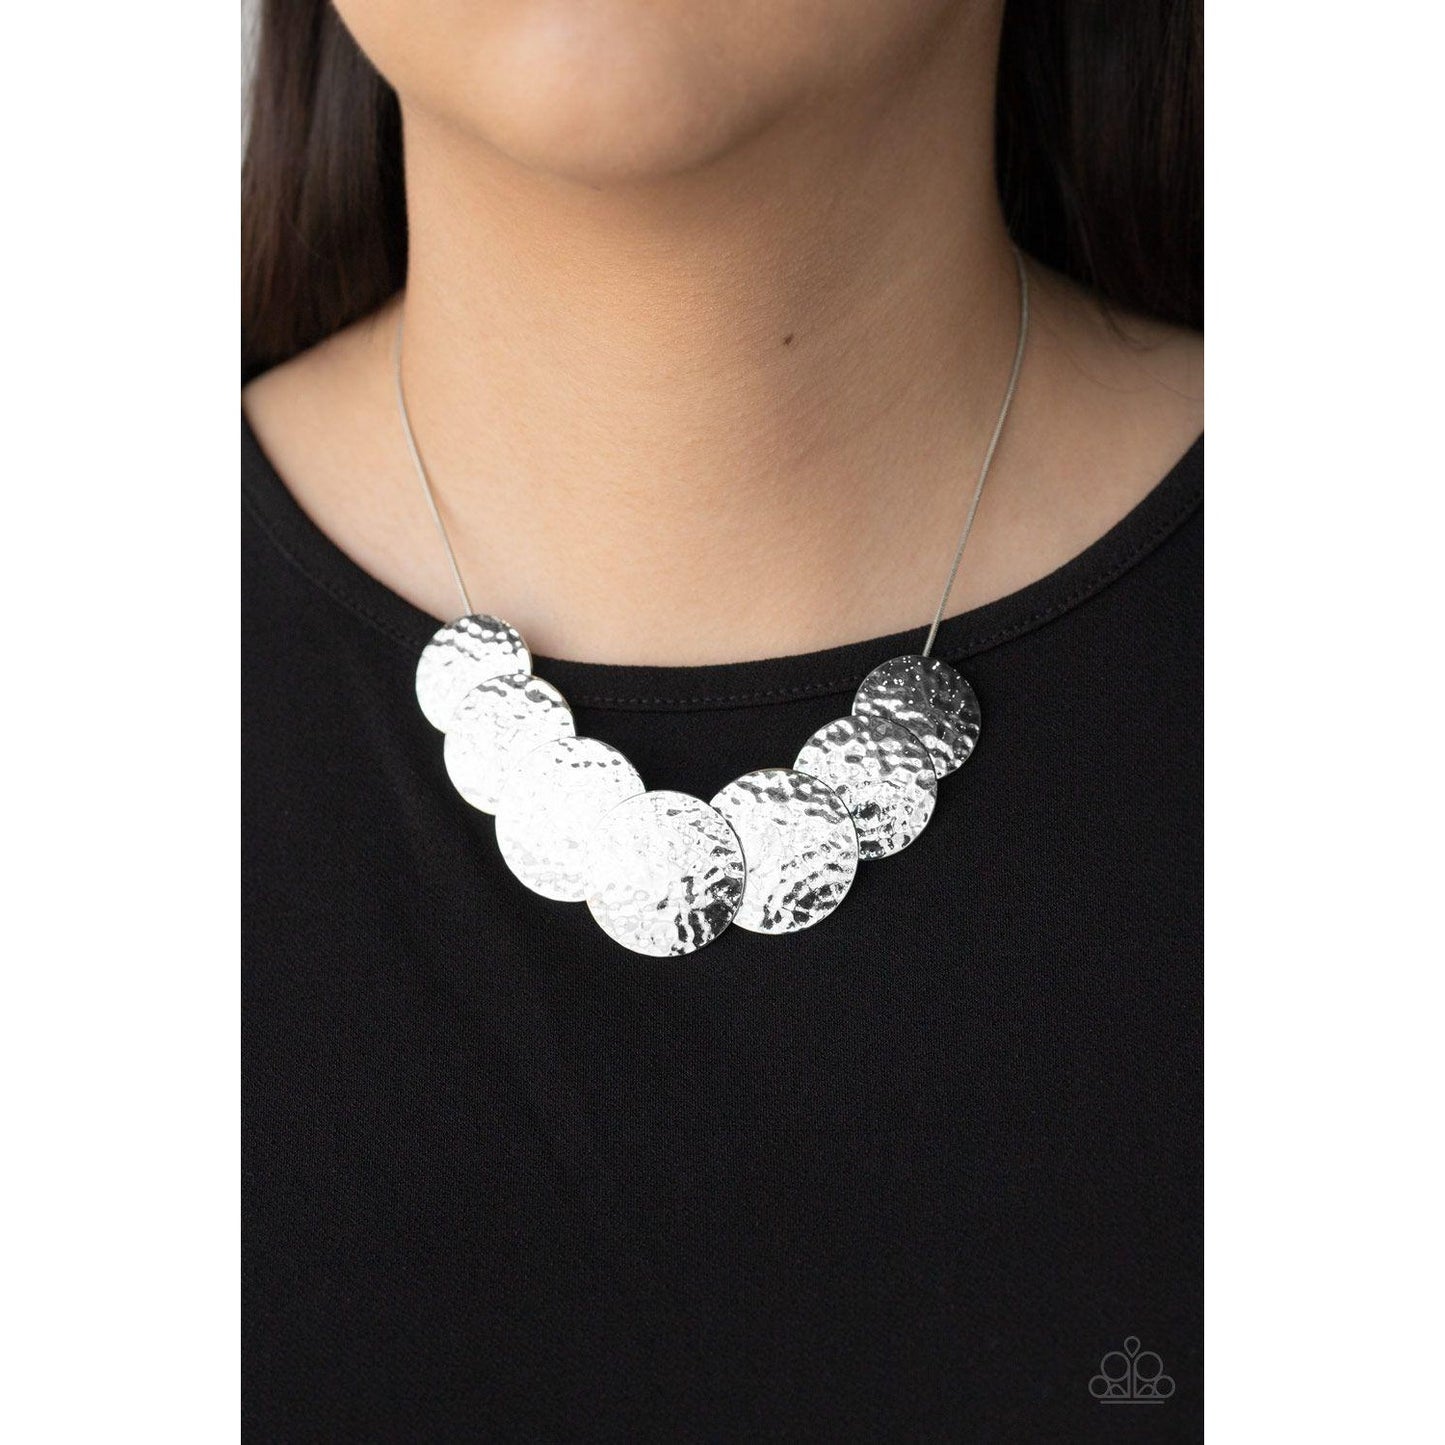 RADIAL Waves - Silver Necklace 2149